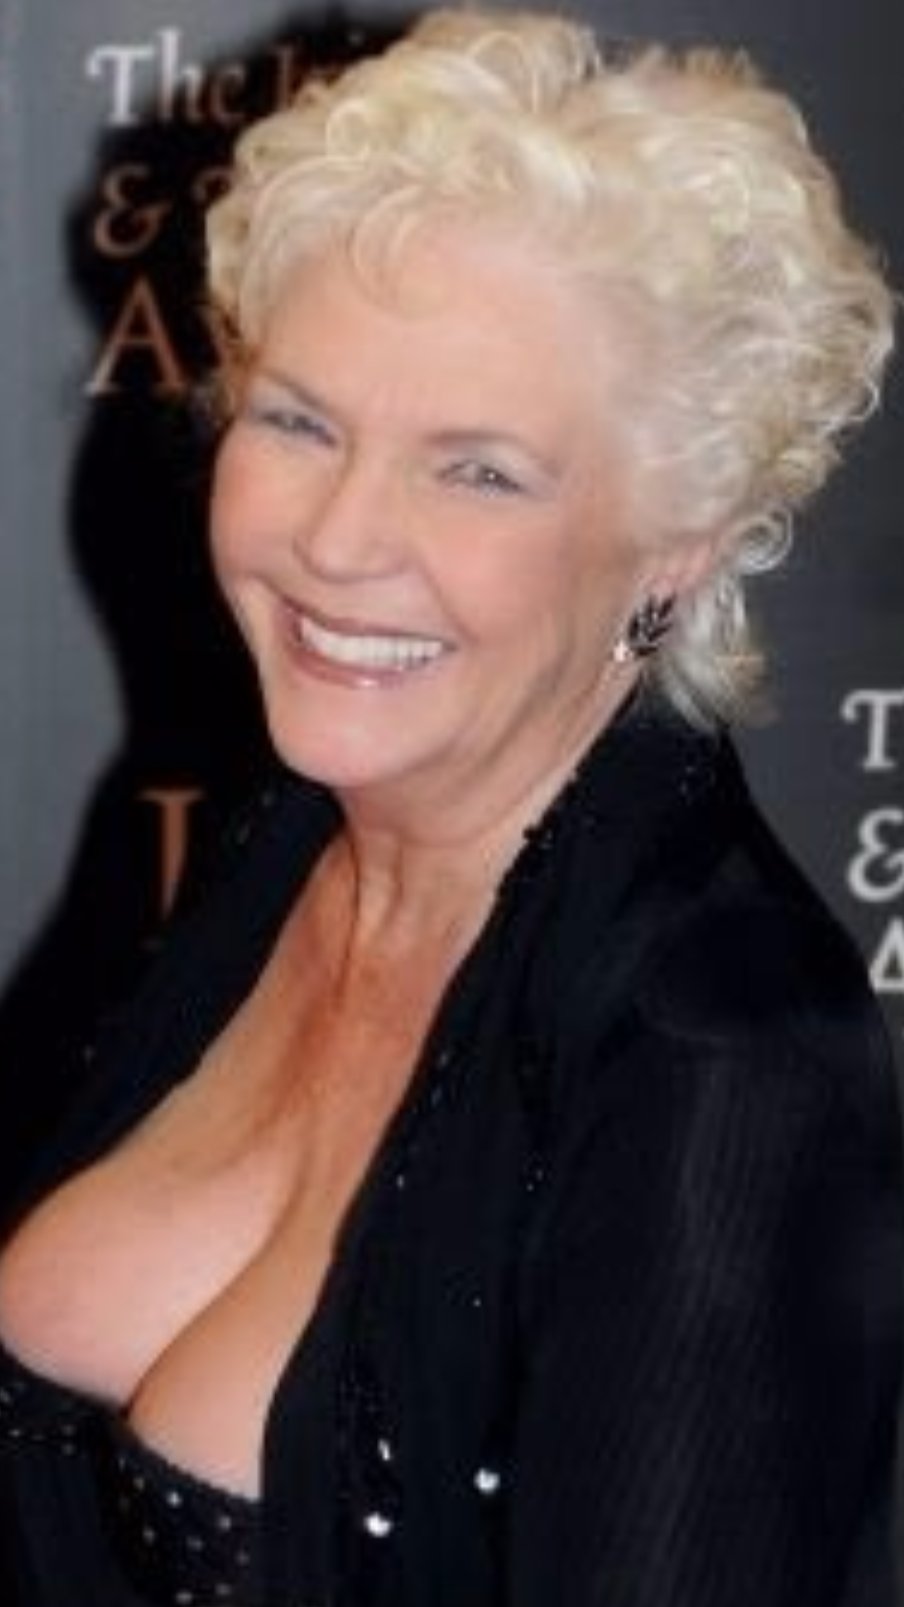 Submissive Lady on X: Can we take a moment to appreciate Fionnula Flanagan  for rocking the cleavage at any age #goals 😍🙌💯 t.coXzk9iroBHw   X